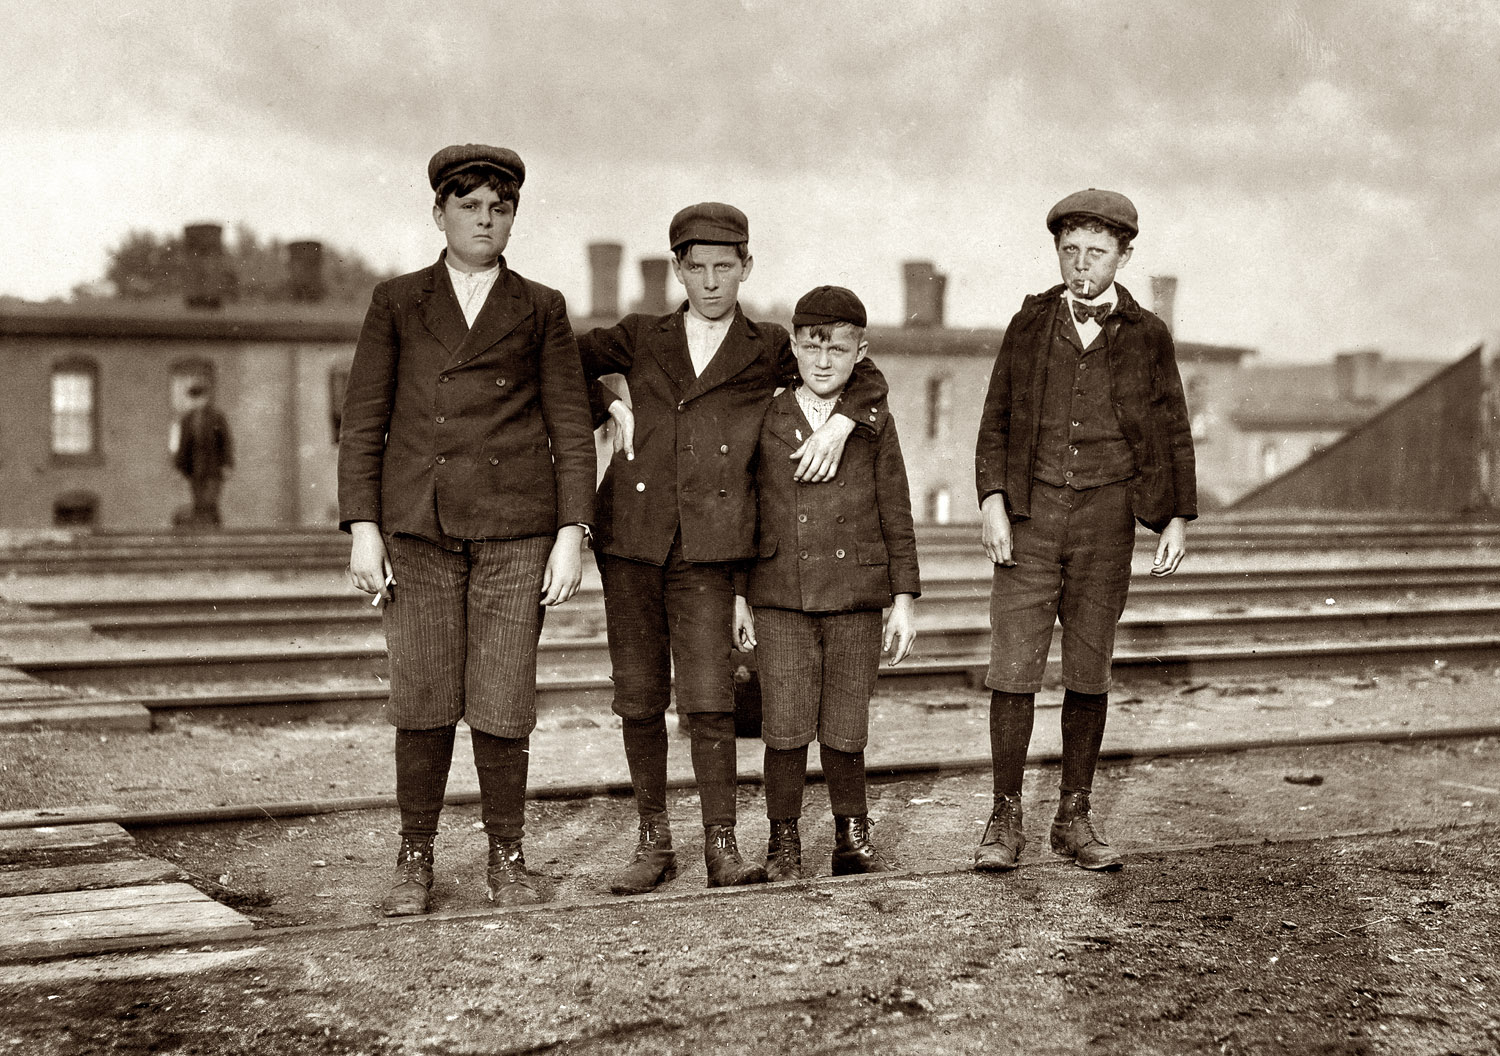 6 p.m., May 18, 1909. Somersworth, New Hampshire. "Group of boys working in Great Falls Manufacturing Co. Smallest boy is Alfred Ouellet, 212 Main Street. Fat boy is Willie Laudry, 35 South St. Boy on right hand end is Napoleon St. Lawrence, 23 Union Street." View full size. Photo and caption by Lewis Wickes Hine.